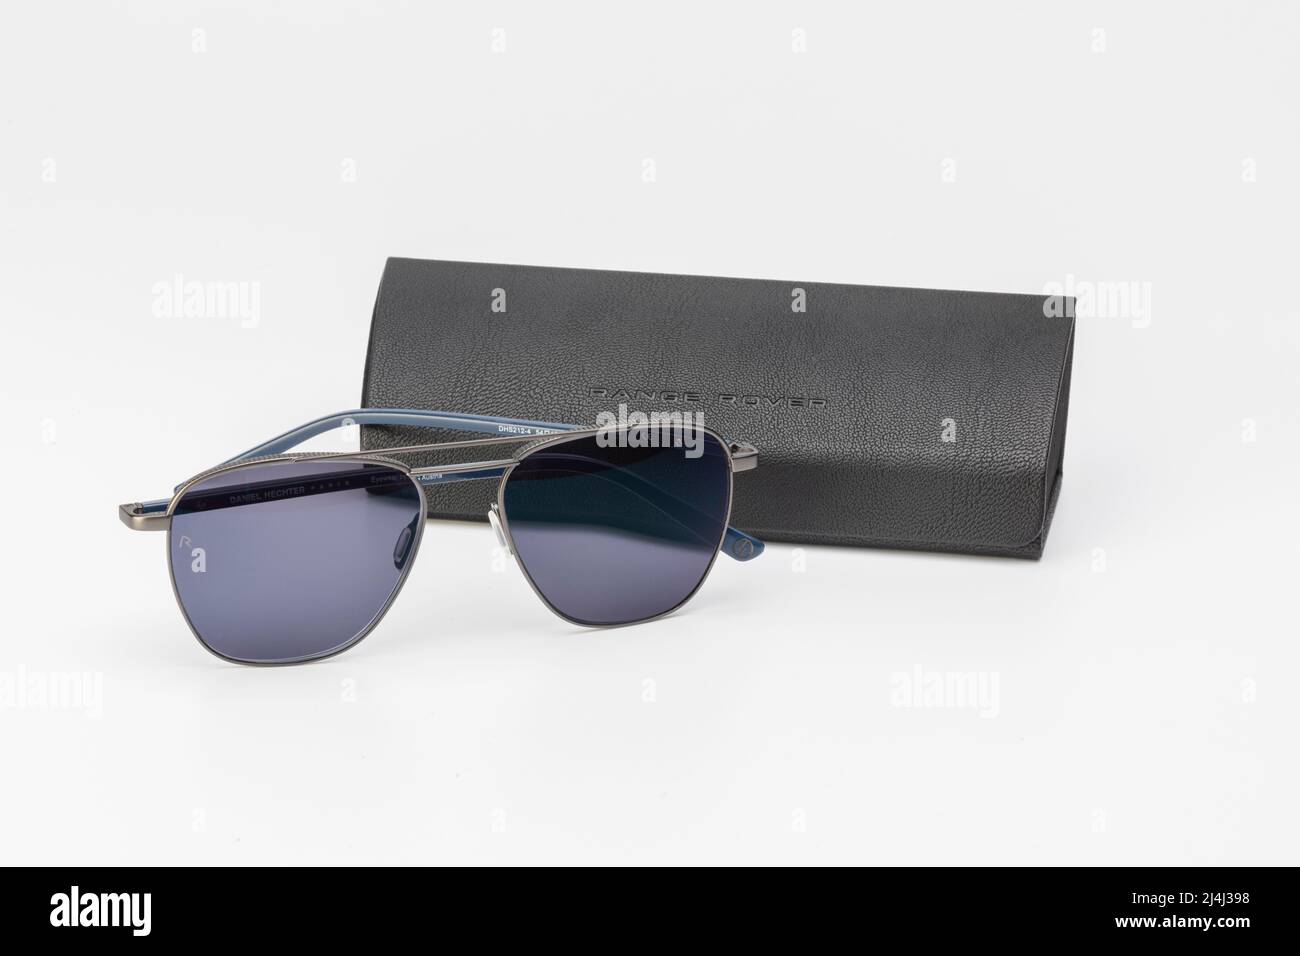 A pair of sunglasses with a Range Rover spectacle case Stock Photo